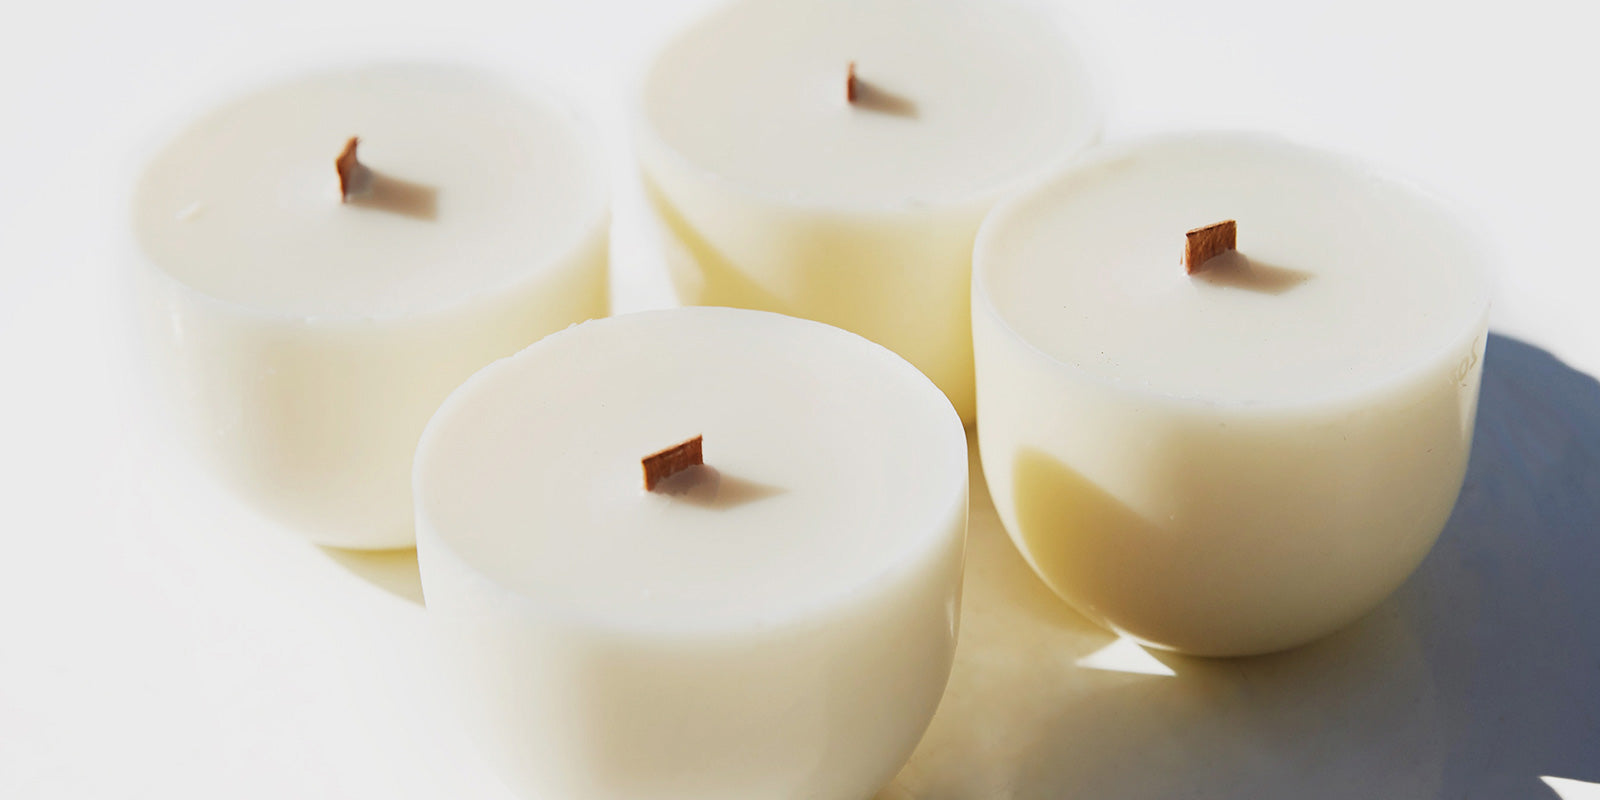 Wooden Wicks - Candle Wicks